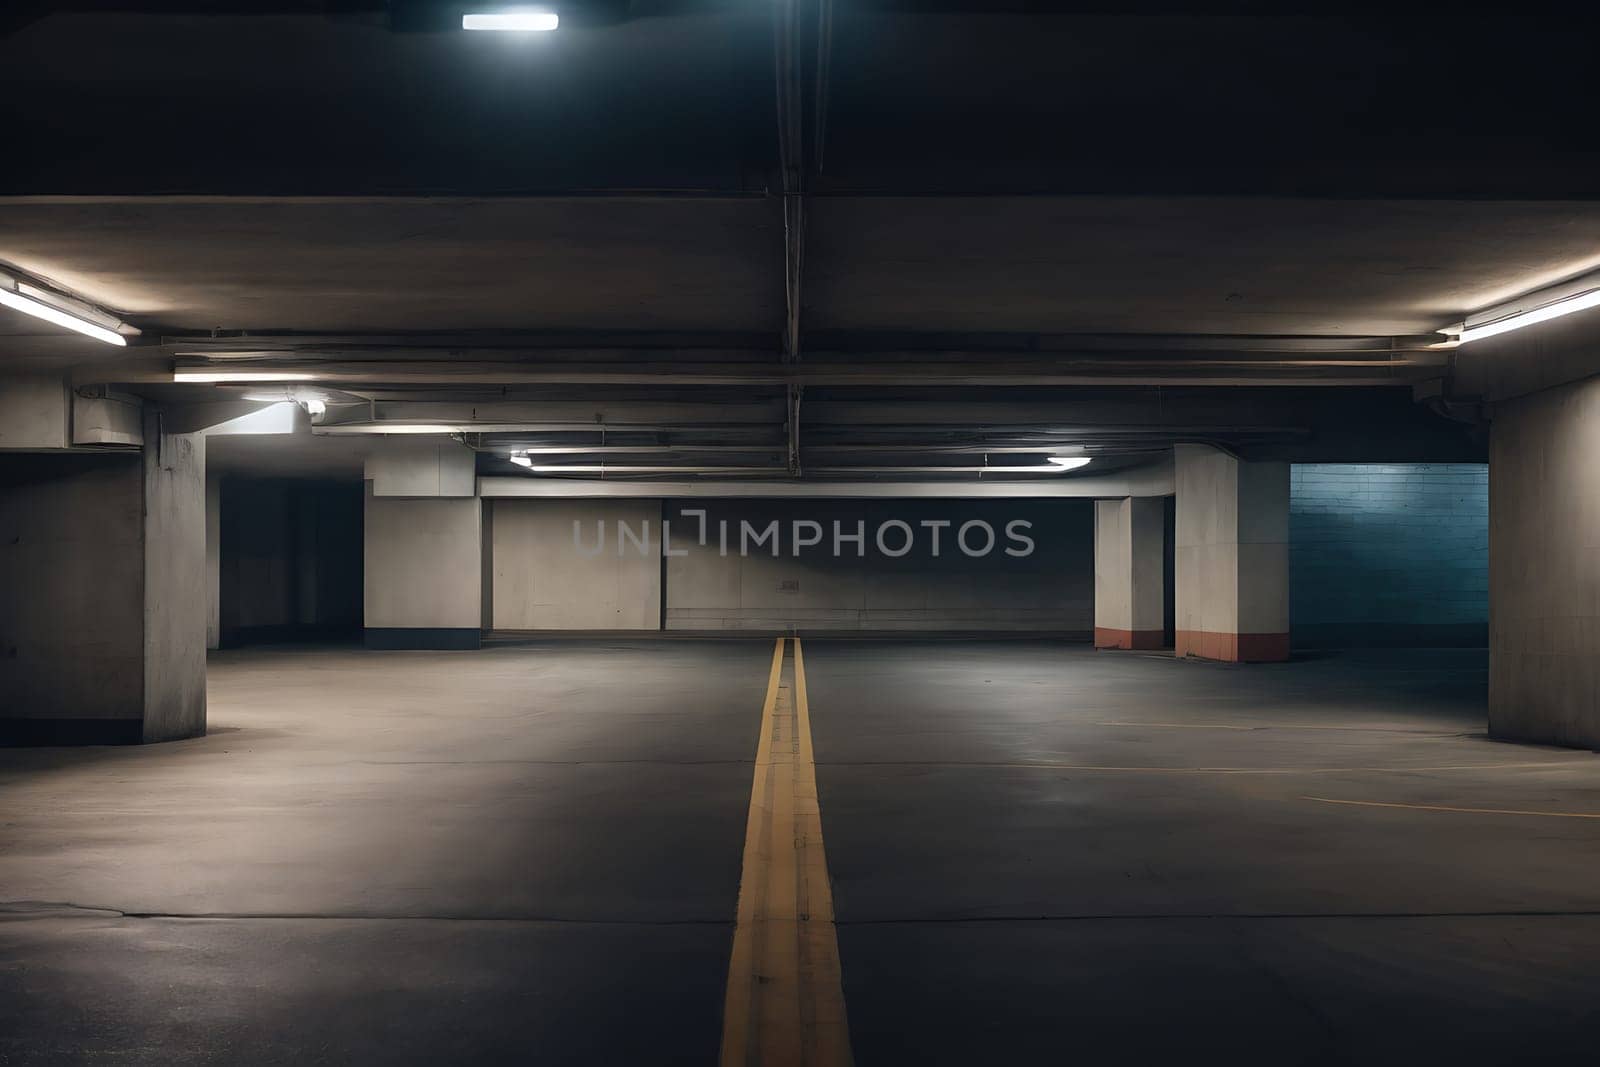 A large, empty parking garage devoid of any vehicles or individuals.